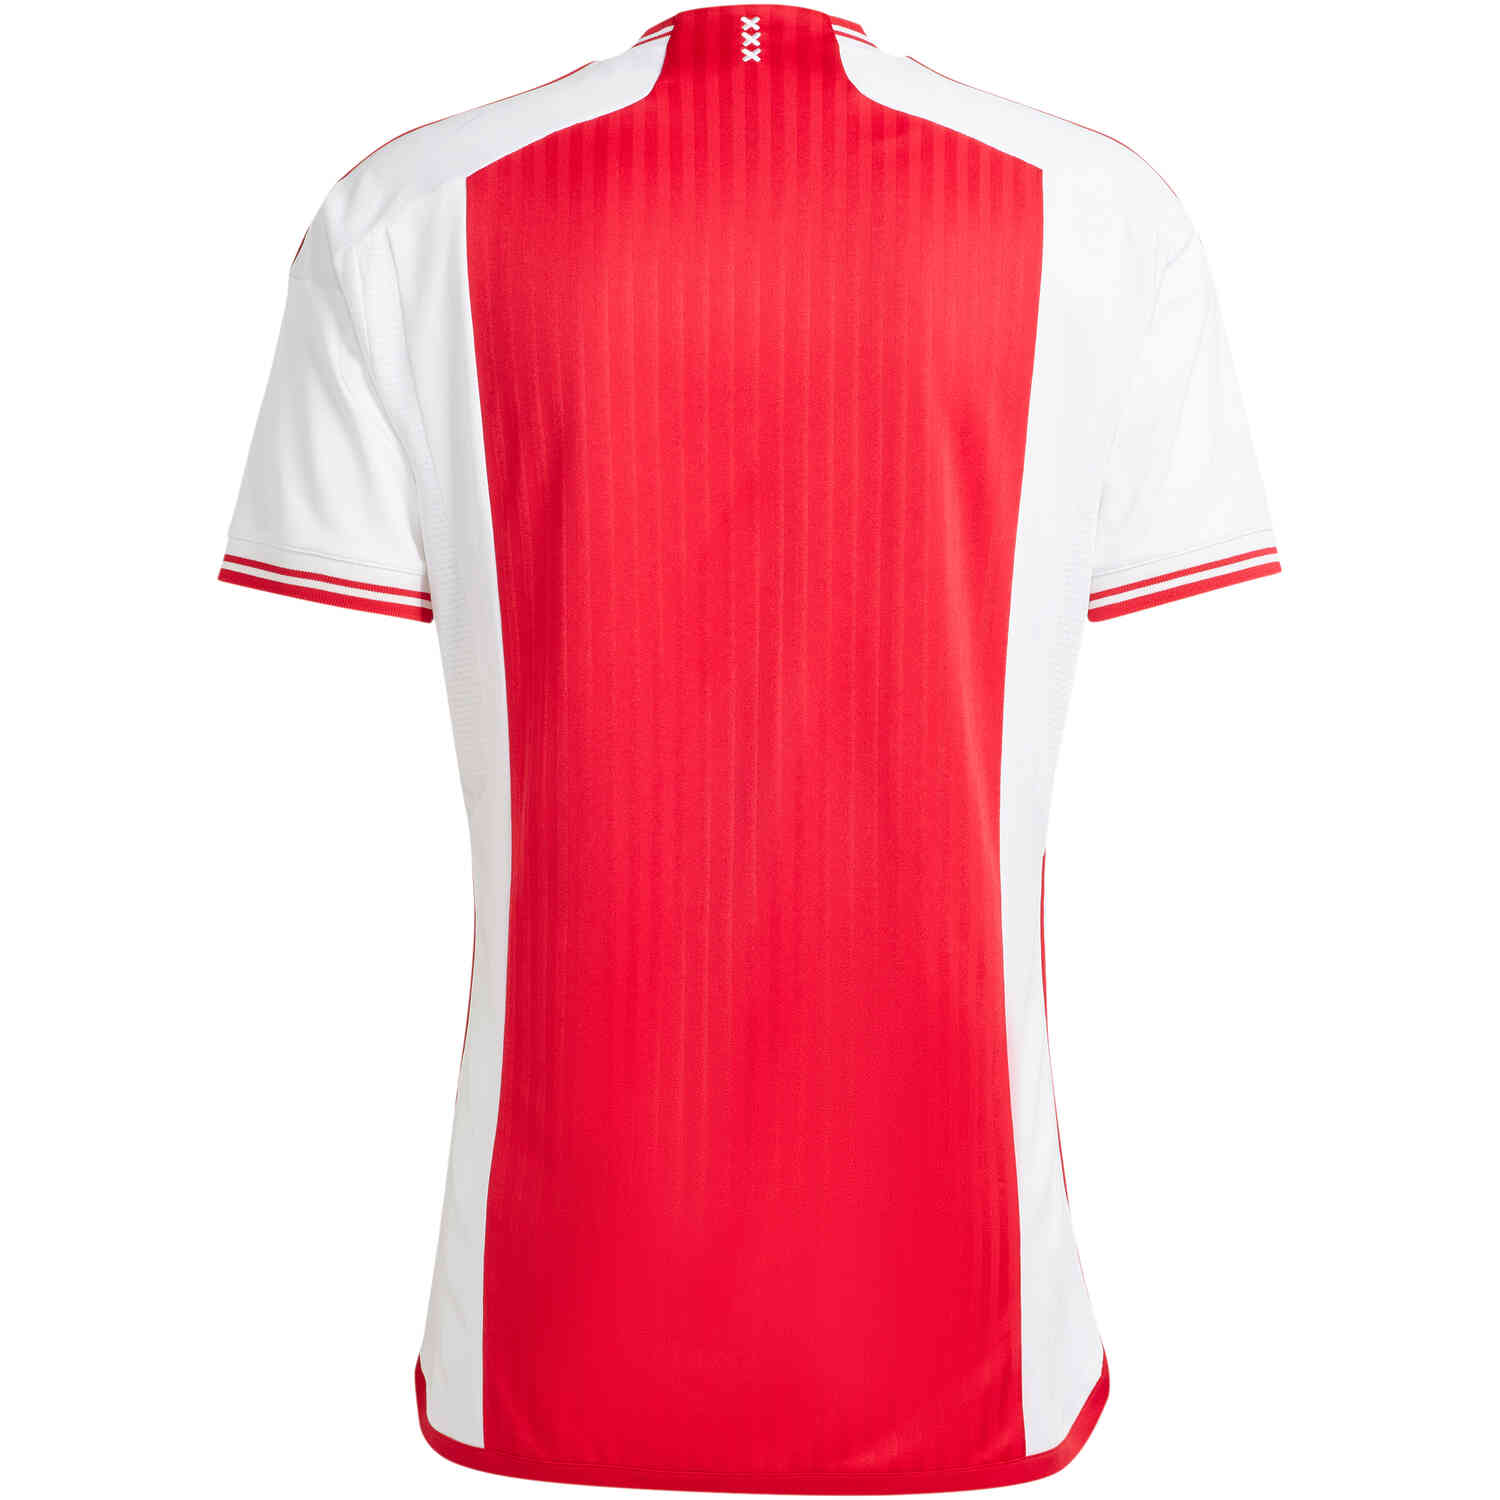 The 2023/2024 Ajax third jersey, inspired by the 'diamonds' of the